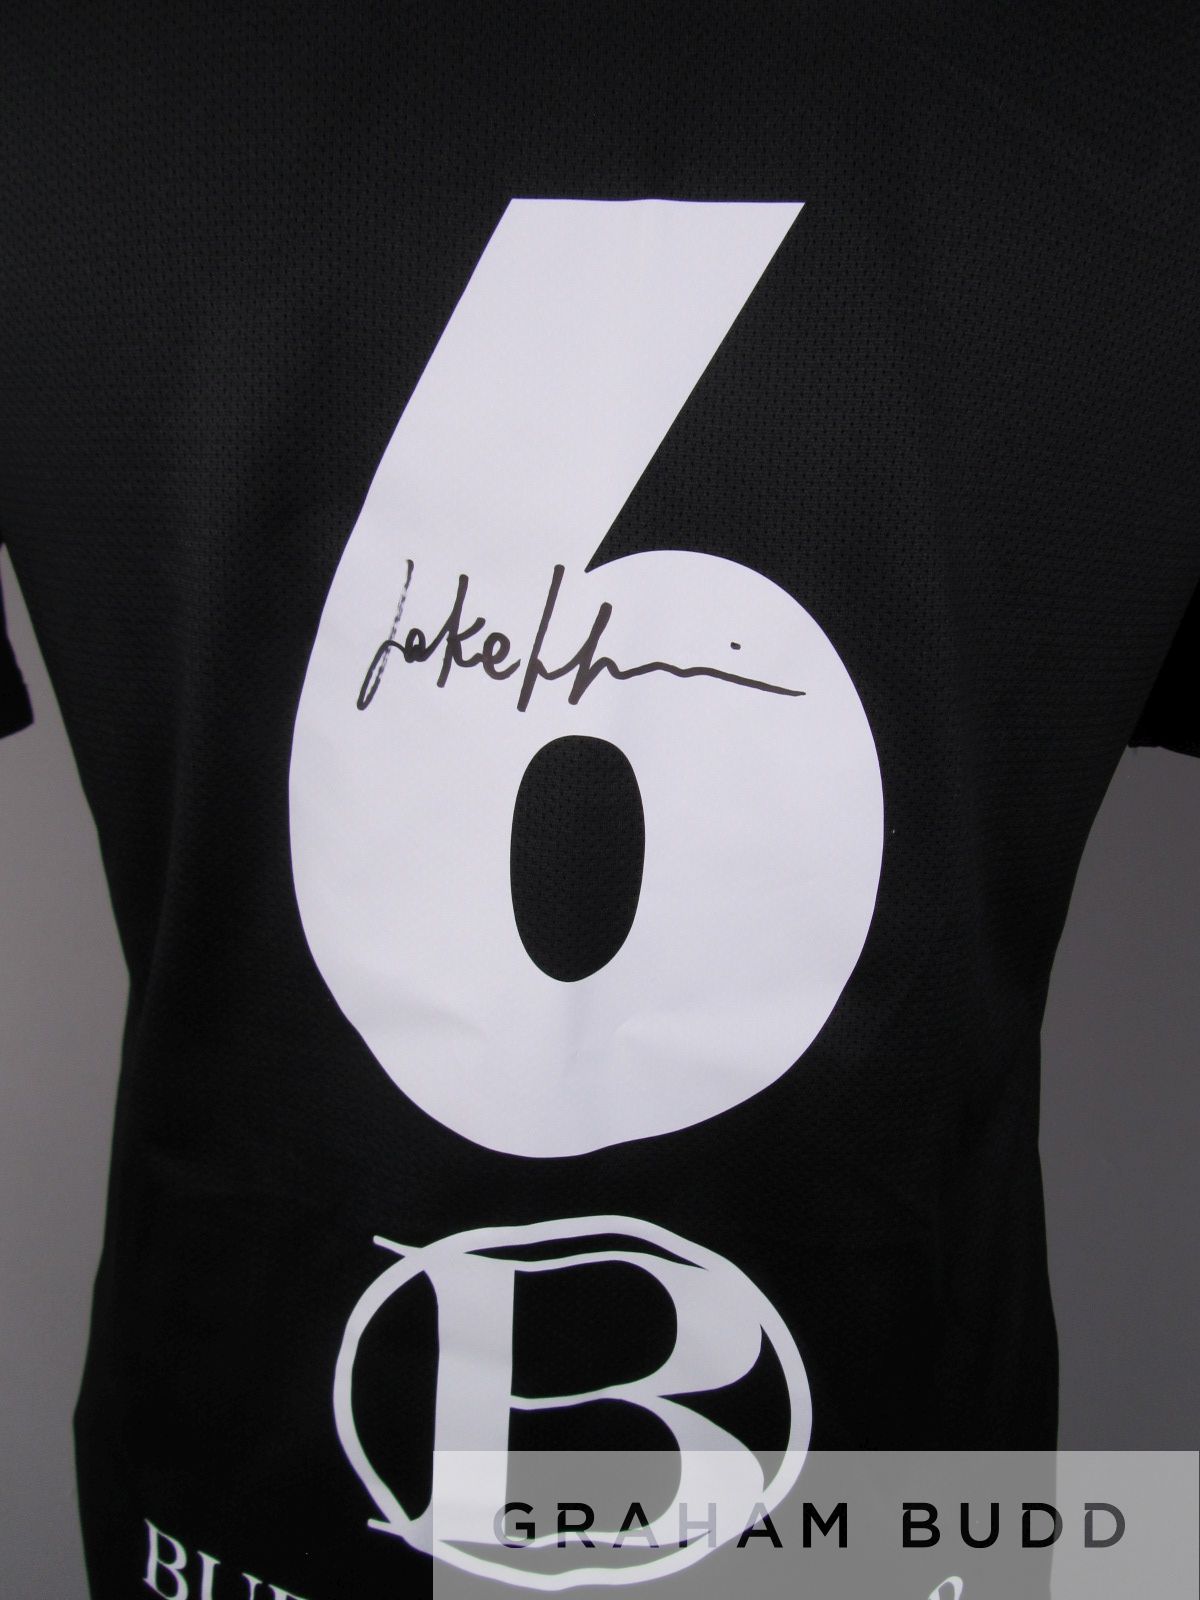 Jake Hall signed Charlie Dukes Memorial Cup no.6 shirt Spurs Charity XI vs Celebrity Invitational XI - Image 3 of 3